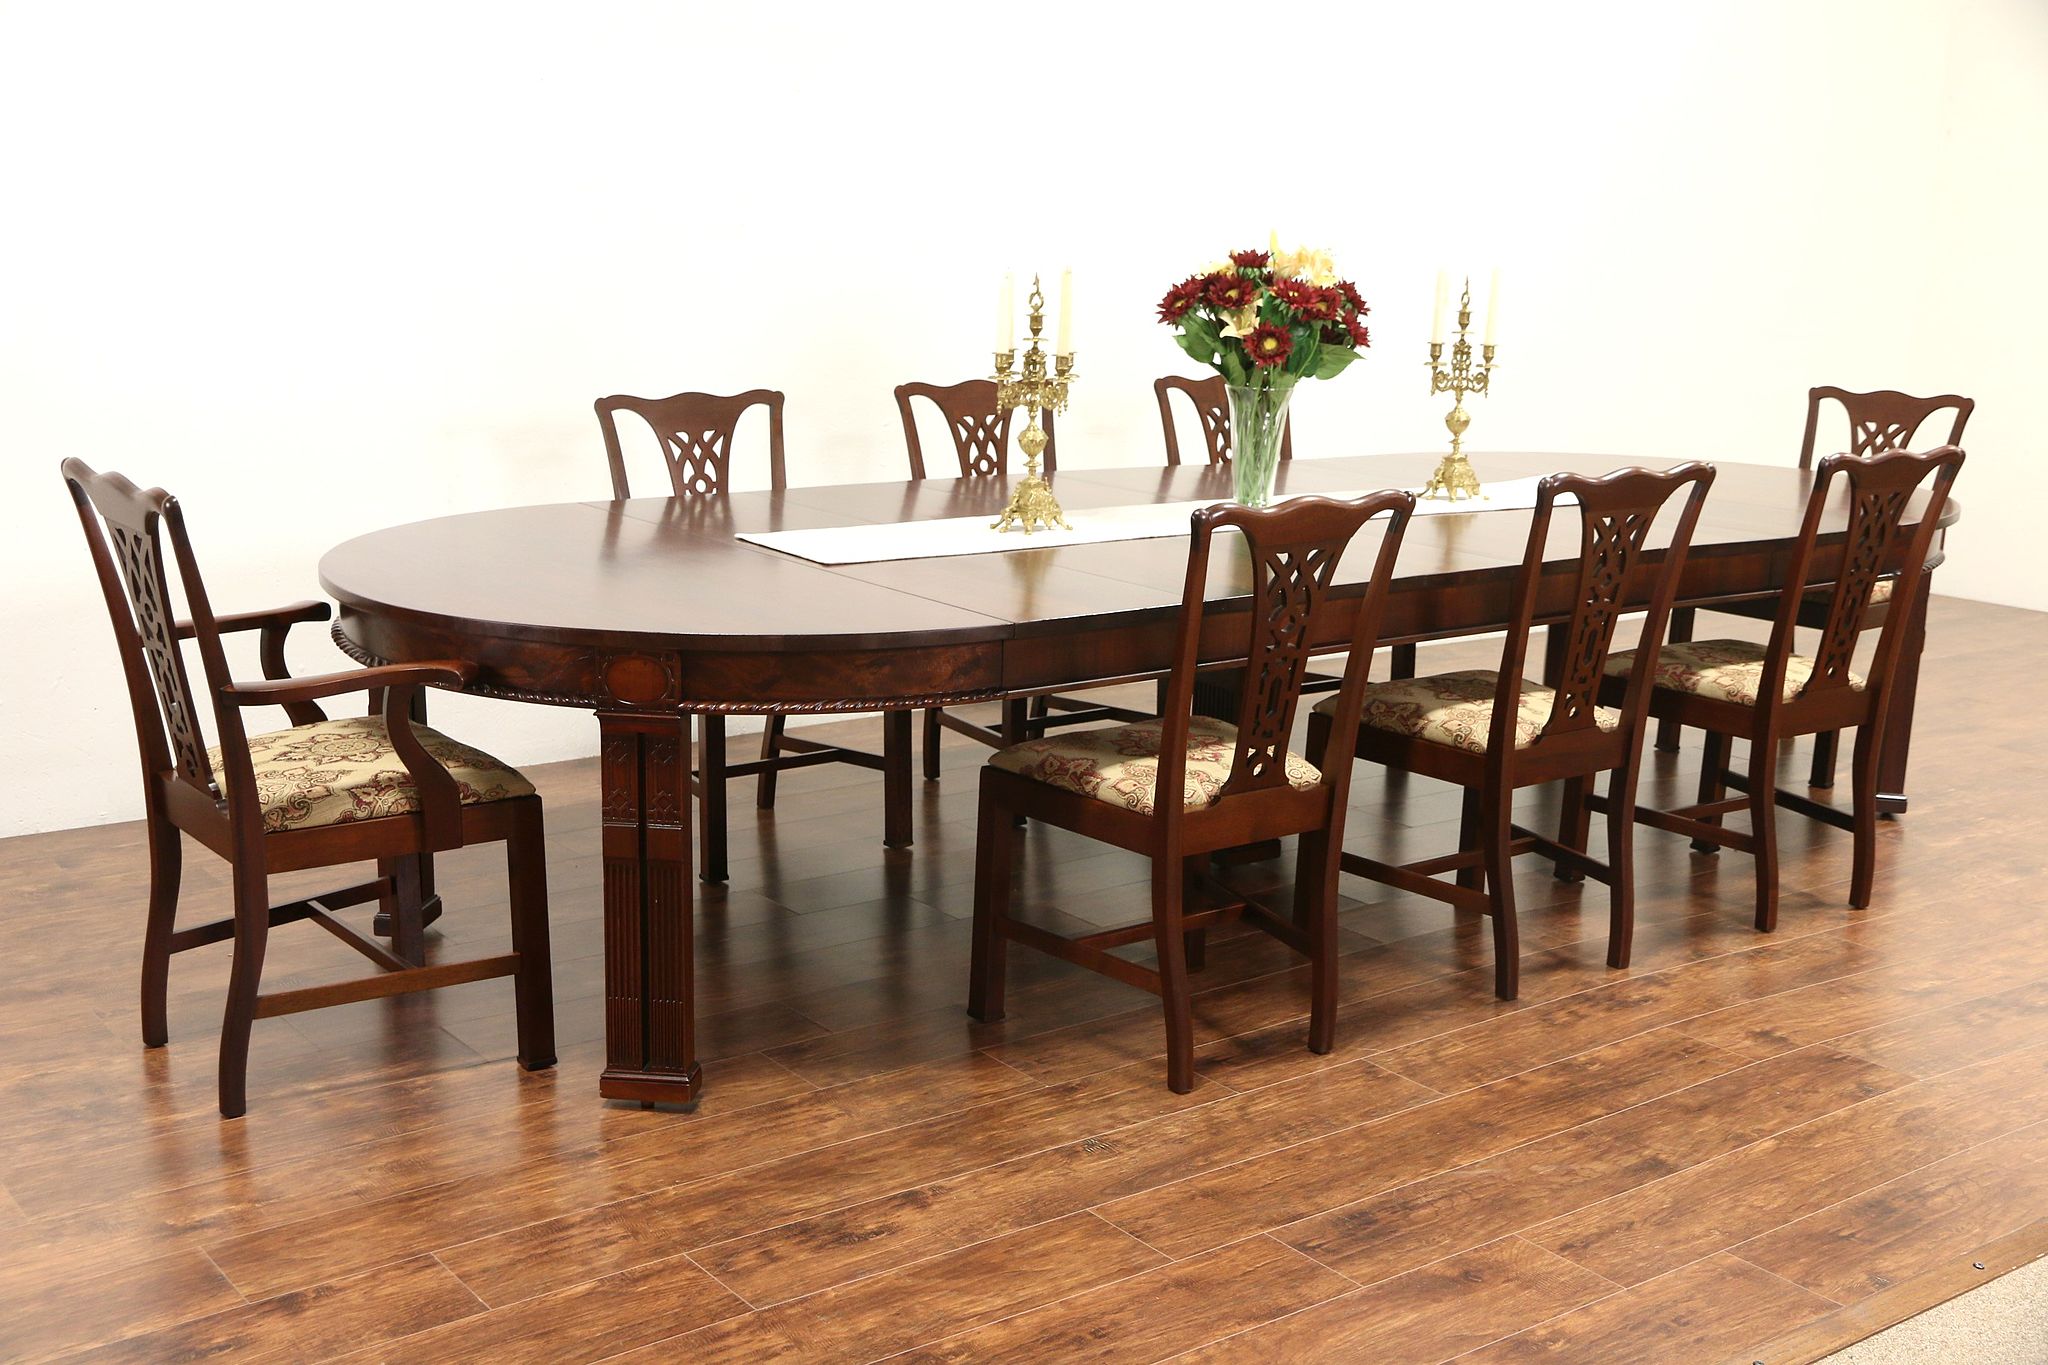 Sold Georgian 1915 Antique Mahogany Dining Set 5 Table Extends 12 1 2 8 Chairs Harp Gallery Antiques Furniture